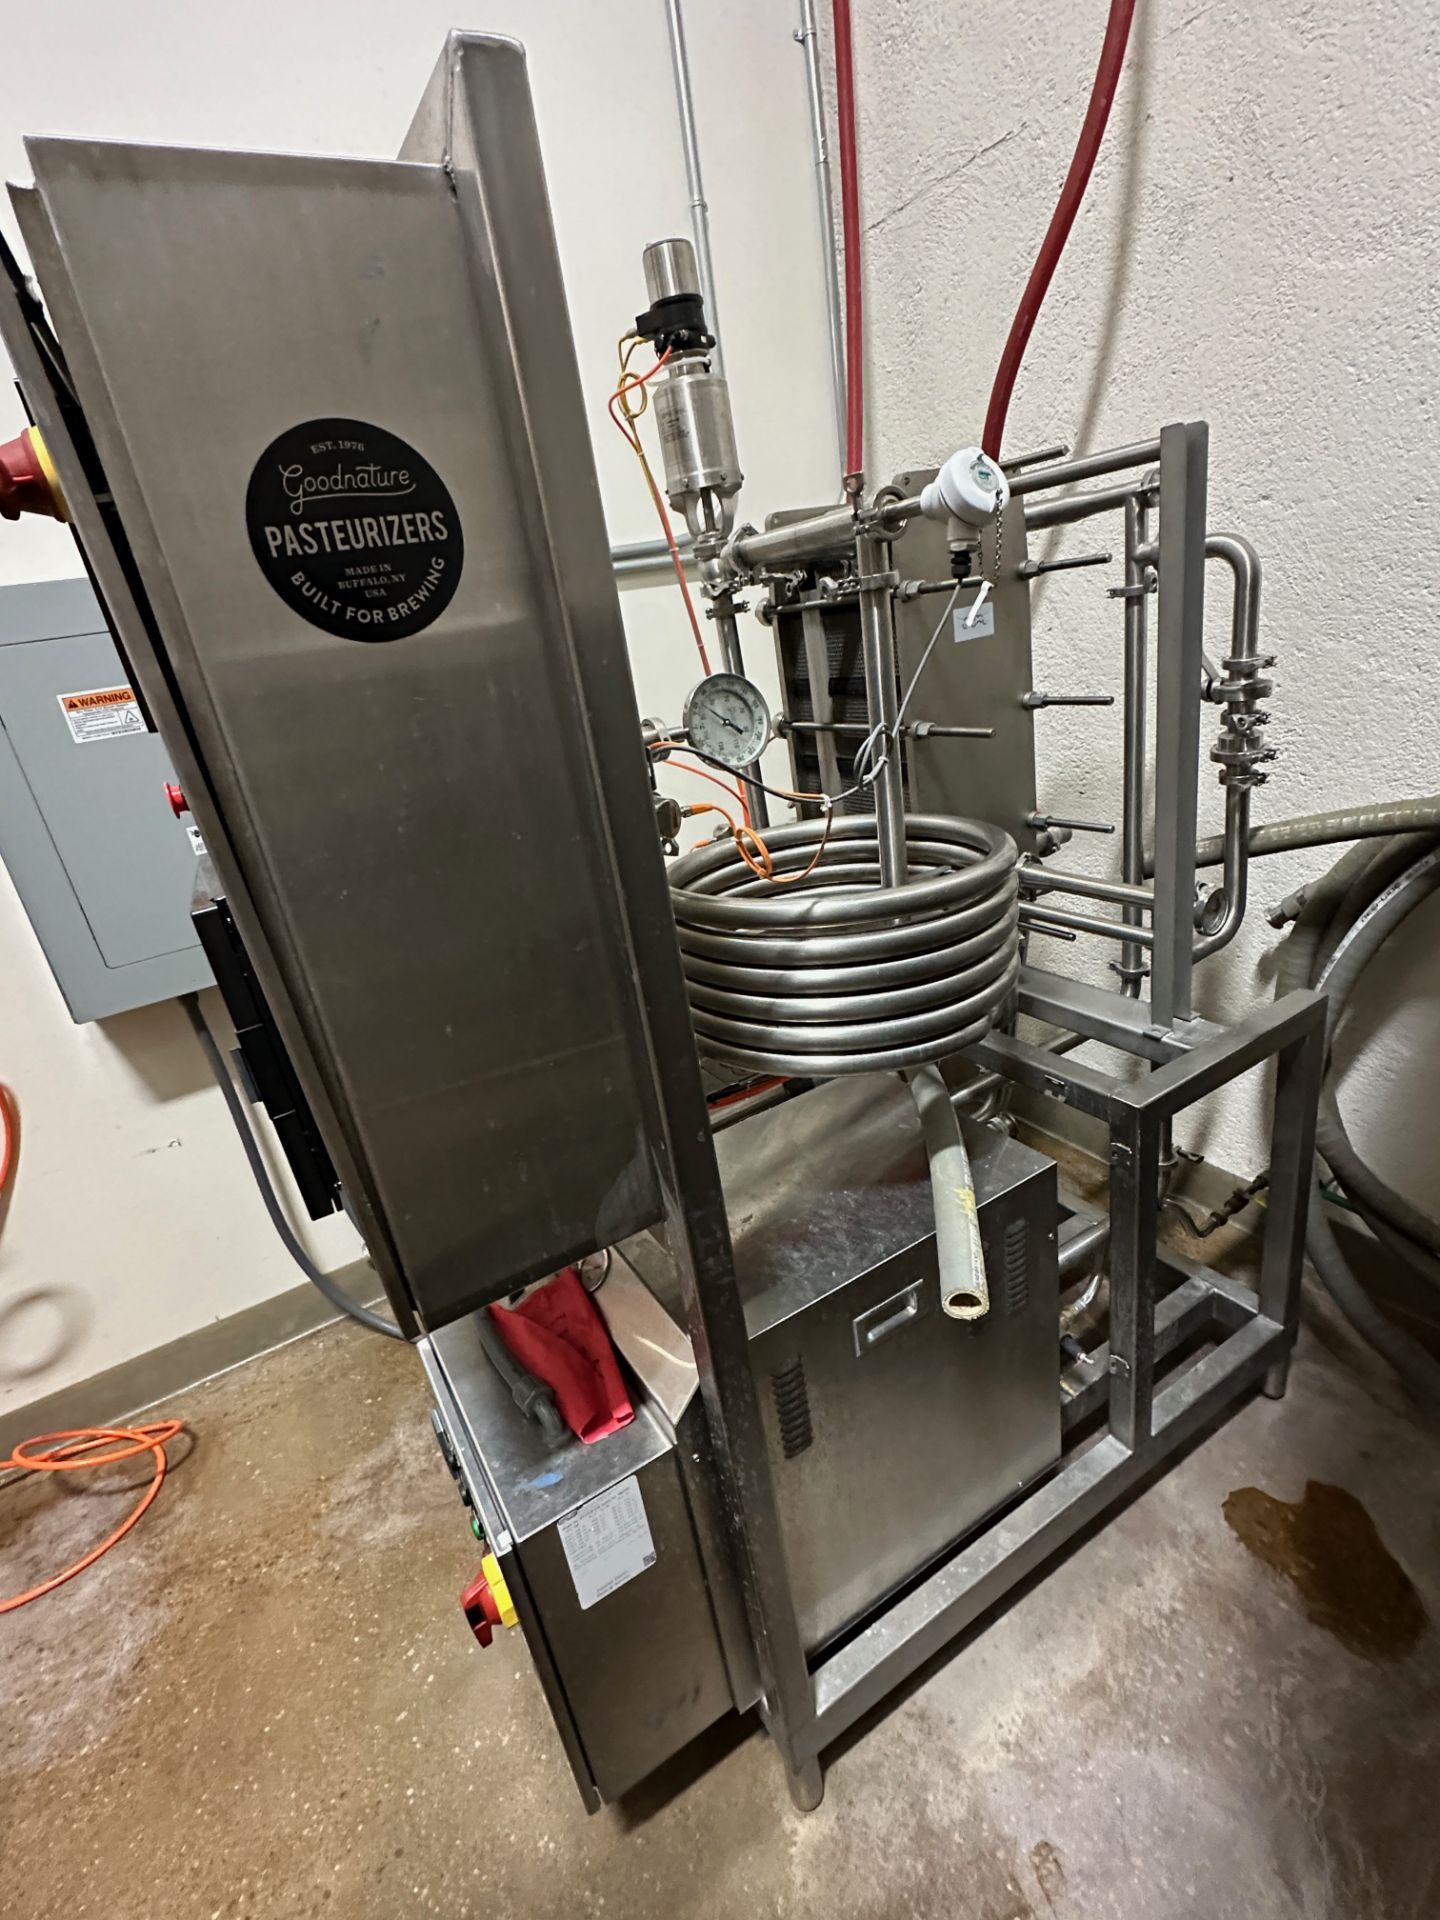 2019 Goodnature CBP 300 Pasteurizer Skid with Alfa Laval Heat Exchanger, Stainless | Rig Fee $350 - Image 2 of 5